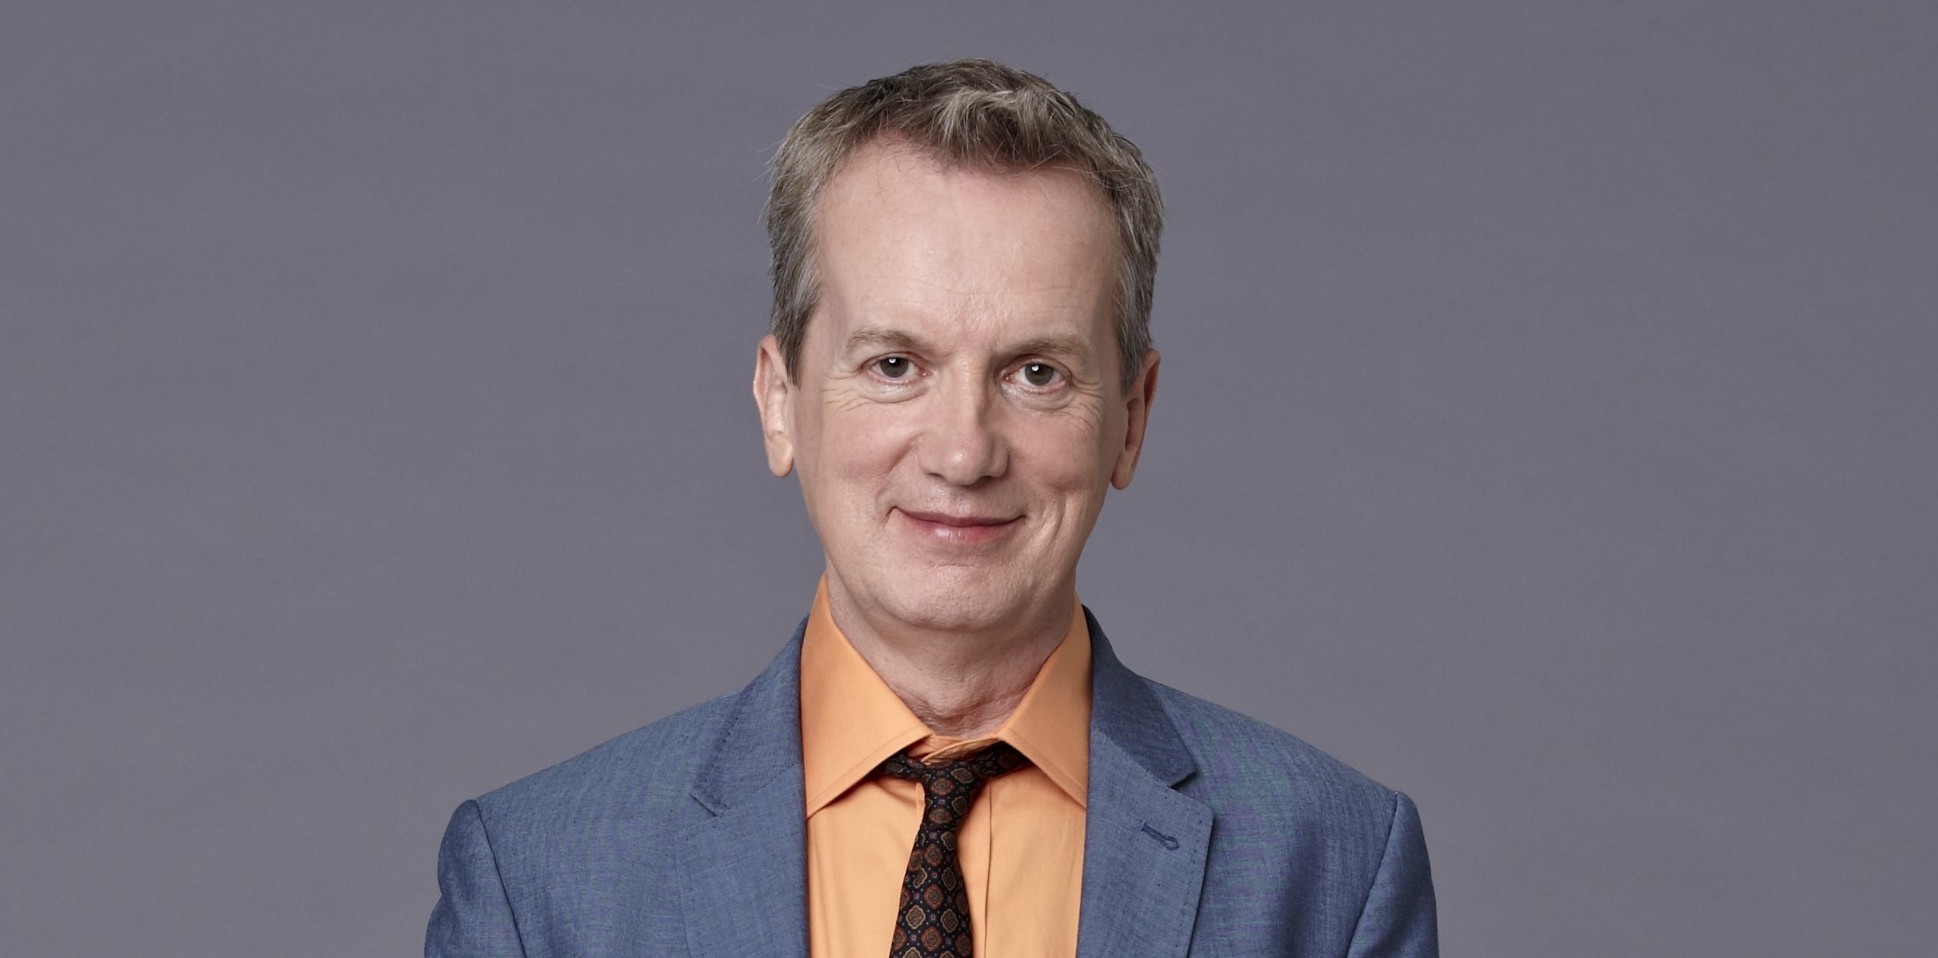 BBC RADIO 4 COMMISSION THE REST IS HISTORY, A BRAND NEW SIX-PART COMEDY PANEL SHOW CREATED AND HOSTED BY FRANK SKINNER